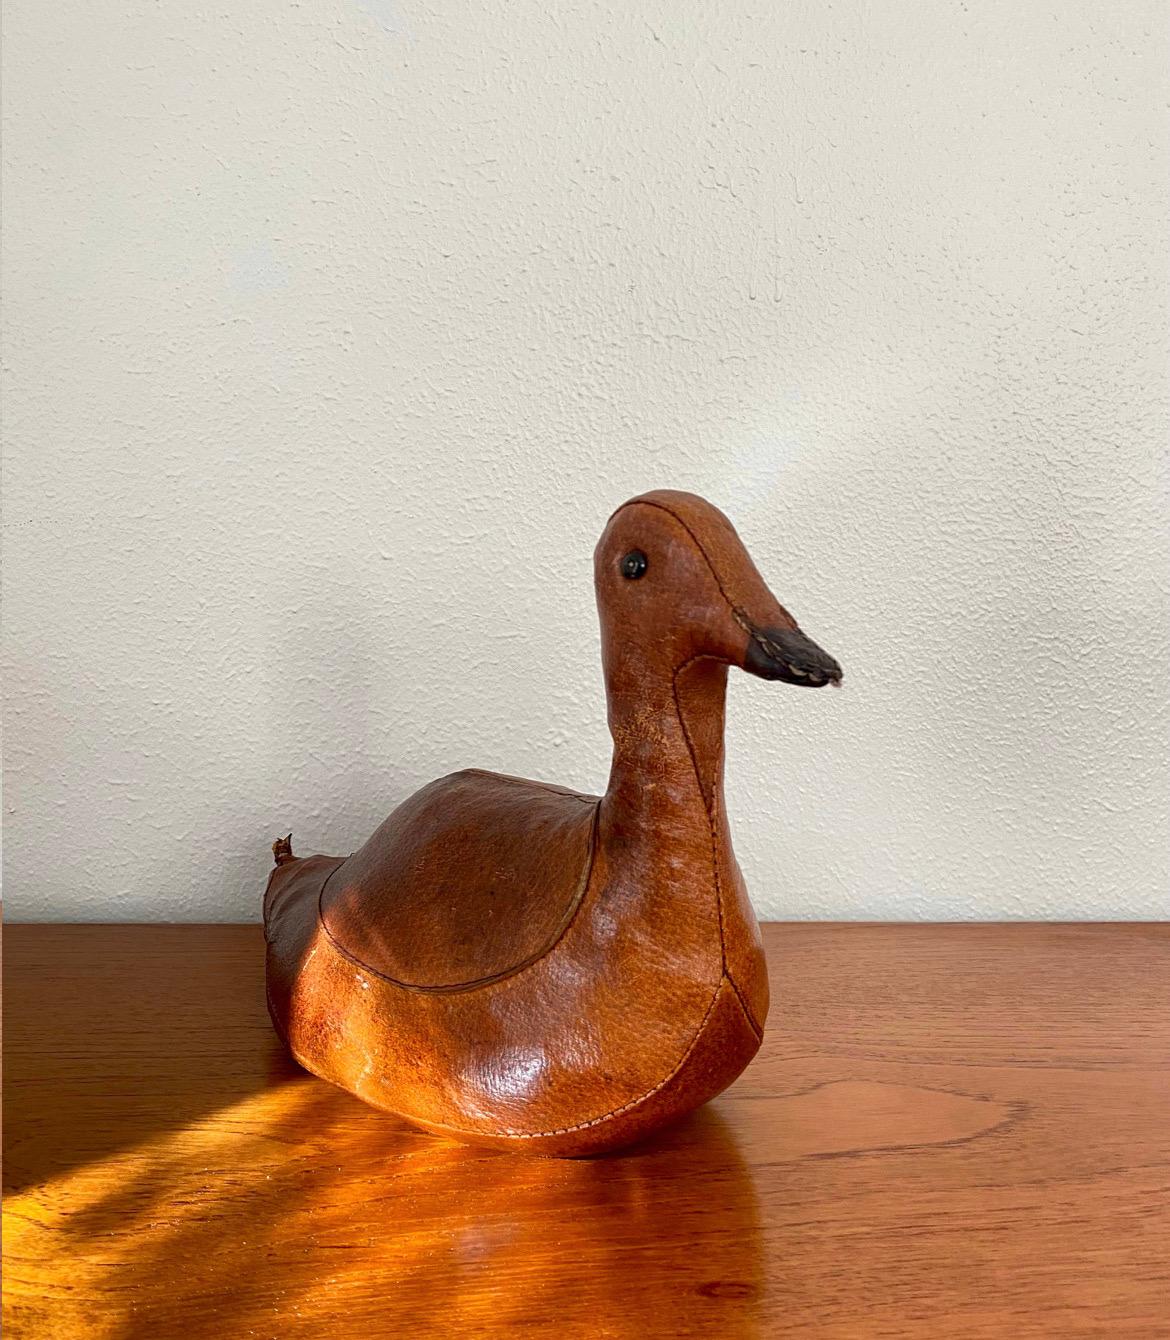 Mid-Century Modern Vintage 1950s Abercrombie and fitch leather duck decor or door stopper 